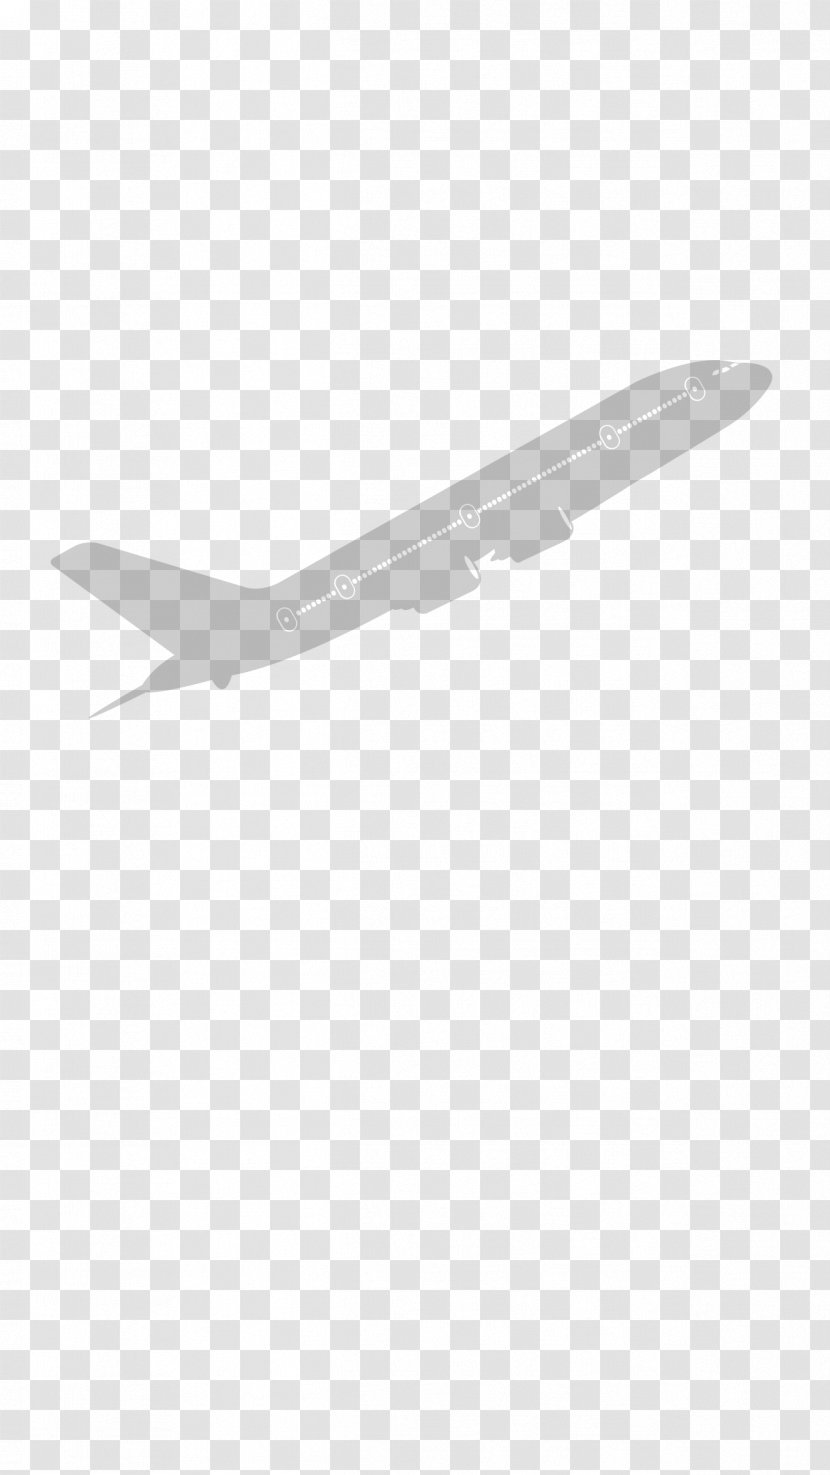 Airplane Aircraft Download - Material Transparent PNG